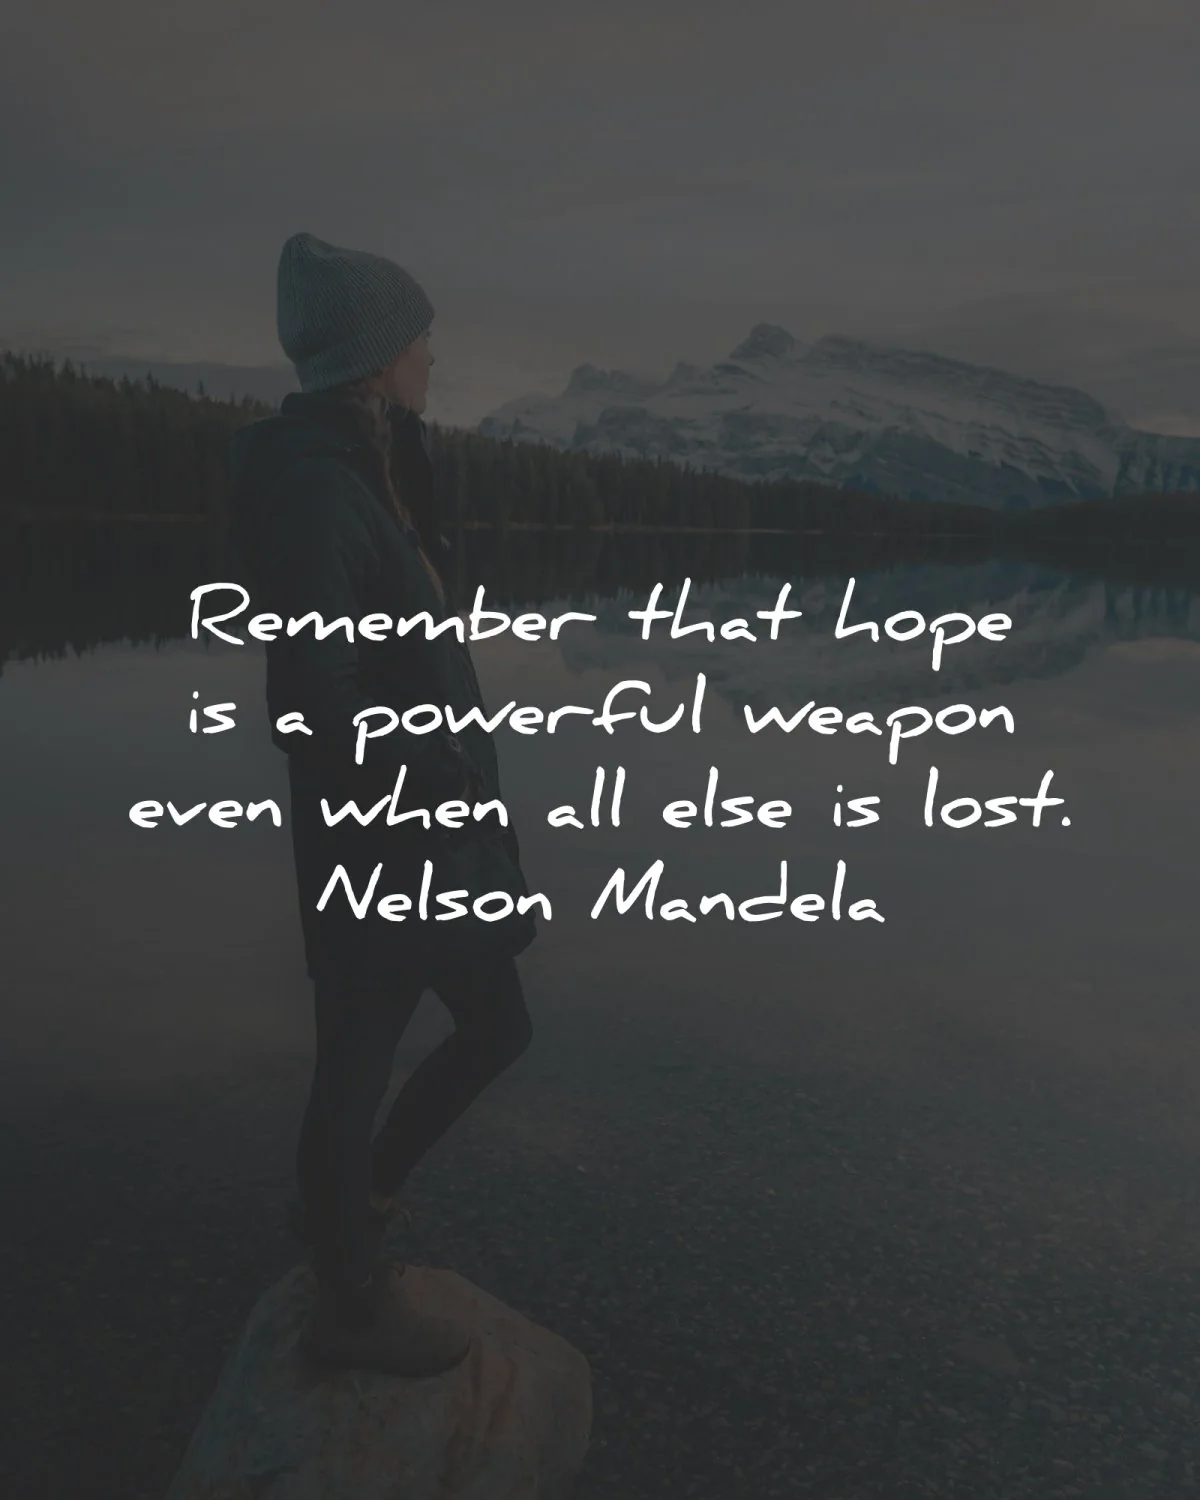 nelson mandela quotes remember hope powerful weapon wisdom